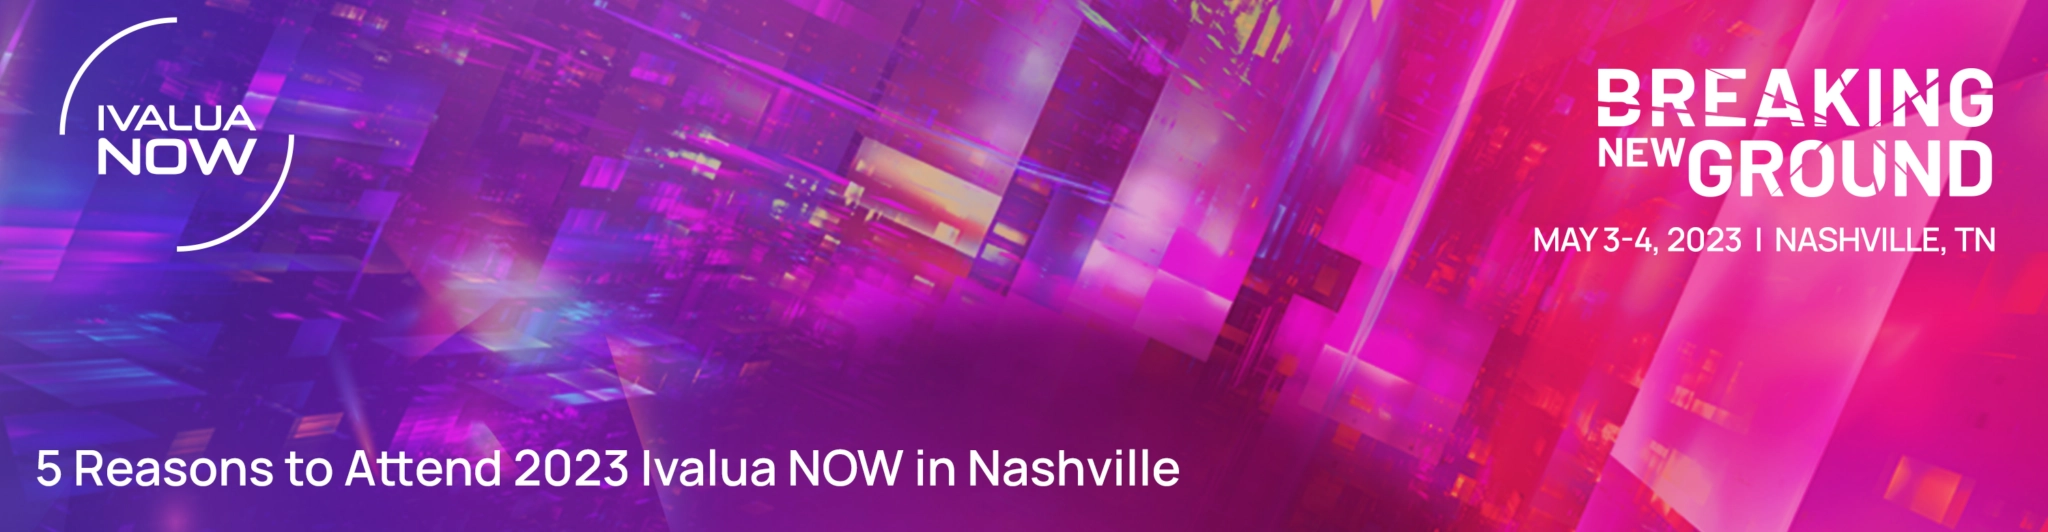 Blog - 2023 Ivalua Now AMER - 5 Reasons to Attend 2023 Ivalua NOW in Nashville